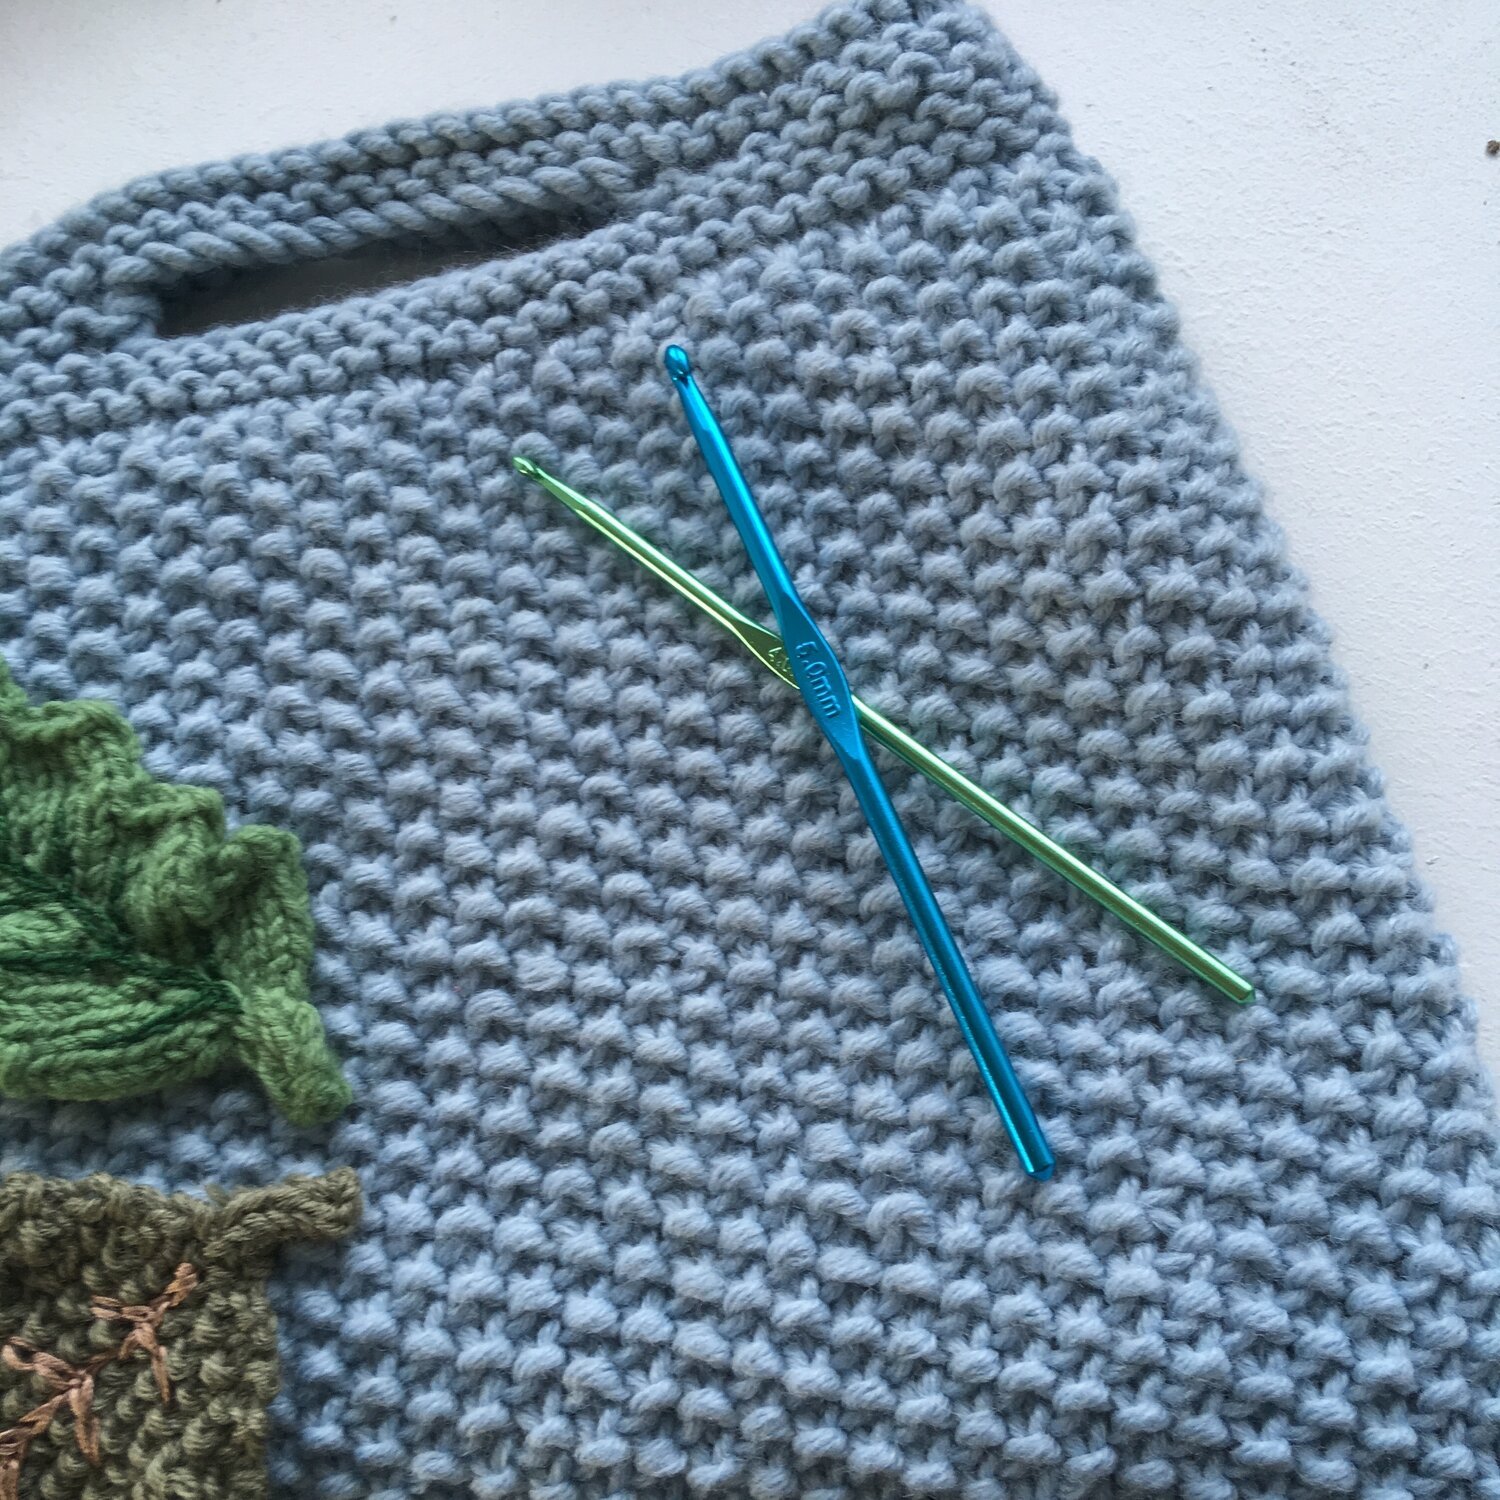 Crocheting Course Learn at Home Live with Rachel - Intermediate - One to One